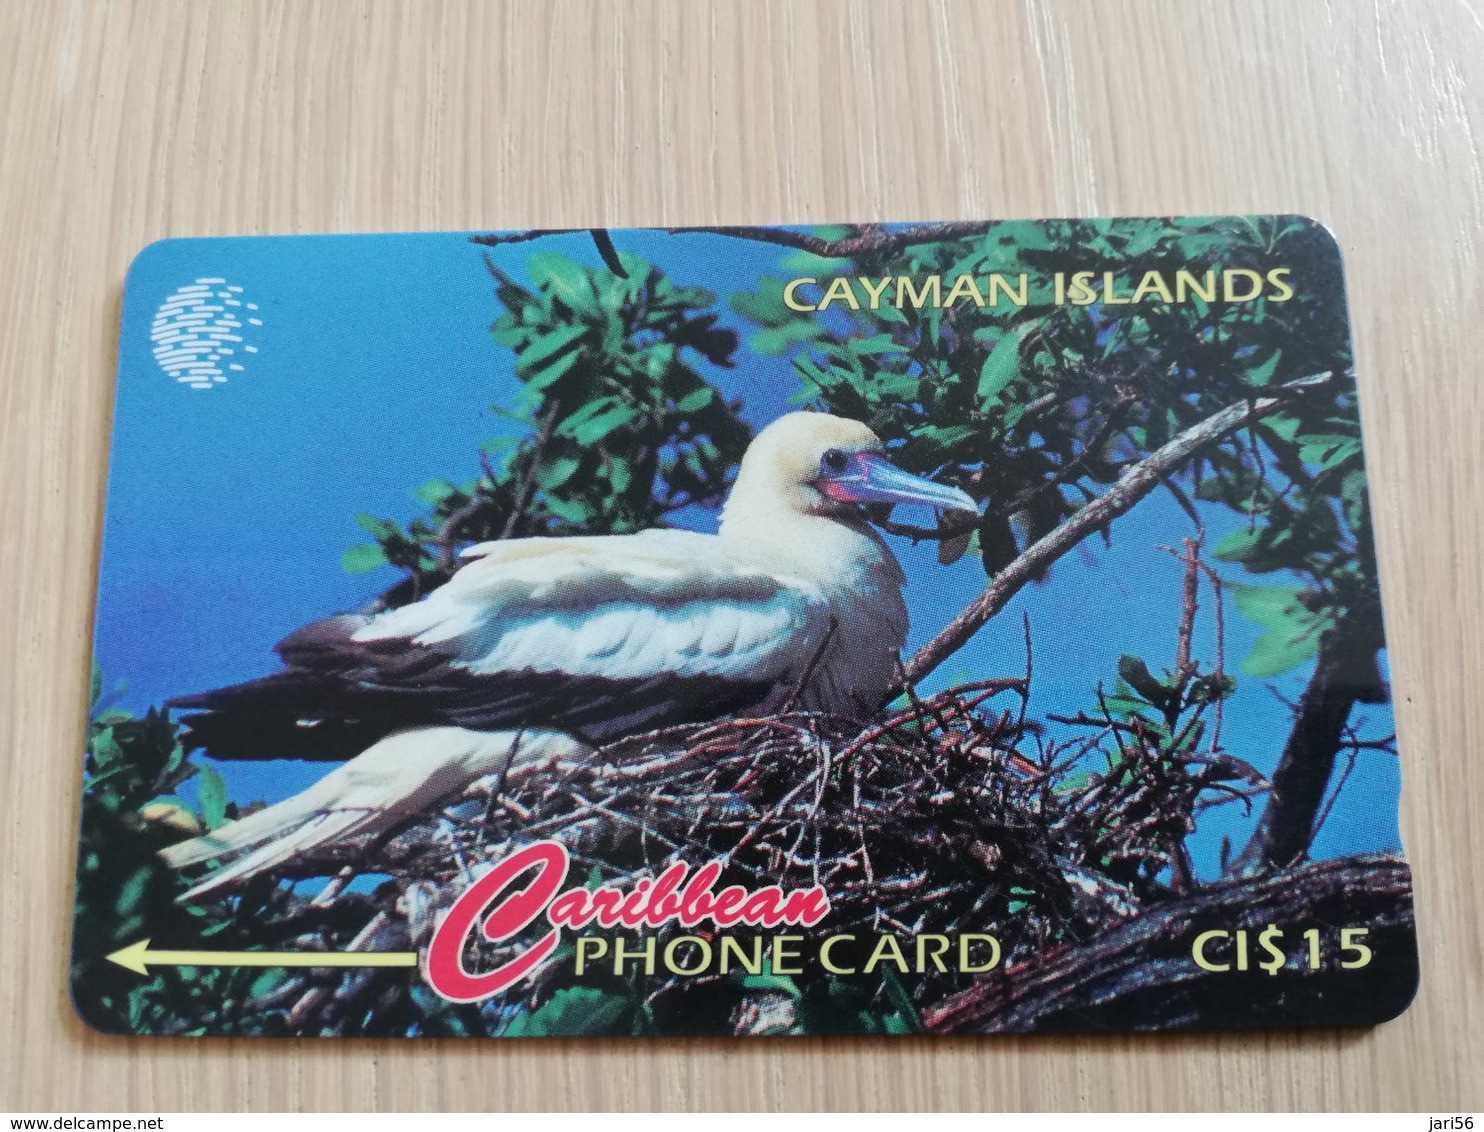 CAYMAN ISLANDS  CI $ 10,-  CAY-11D  CONTROL NR 11CCID  RED FOOTED BOOBY      NEW  LOGO     Fine Used Card  ** 3085** - Kaaimaneilanden